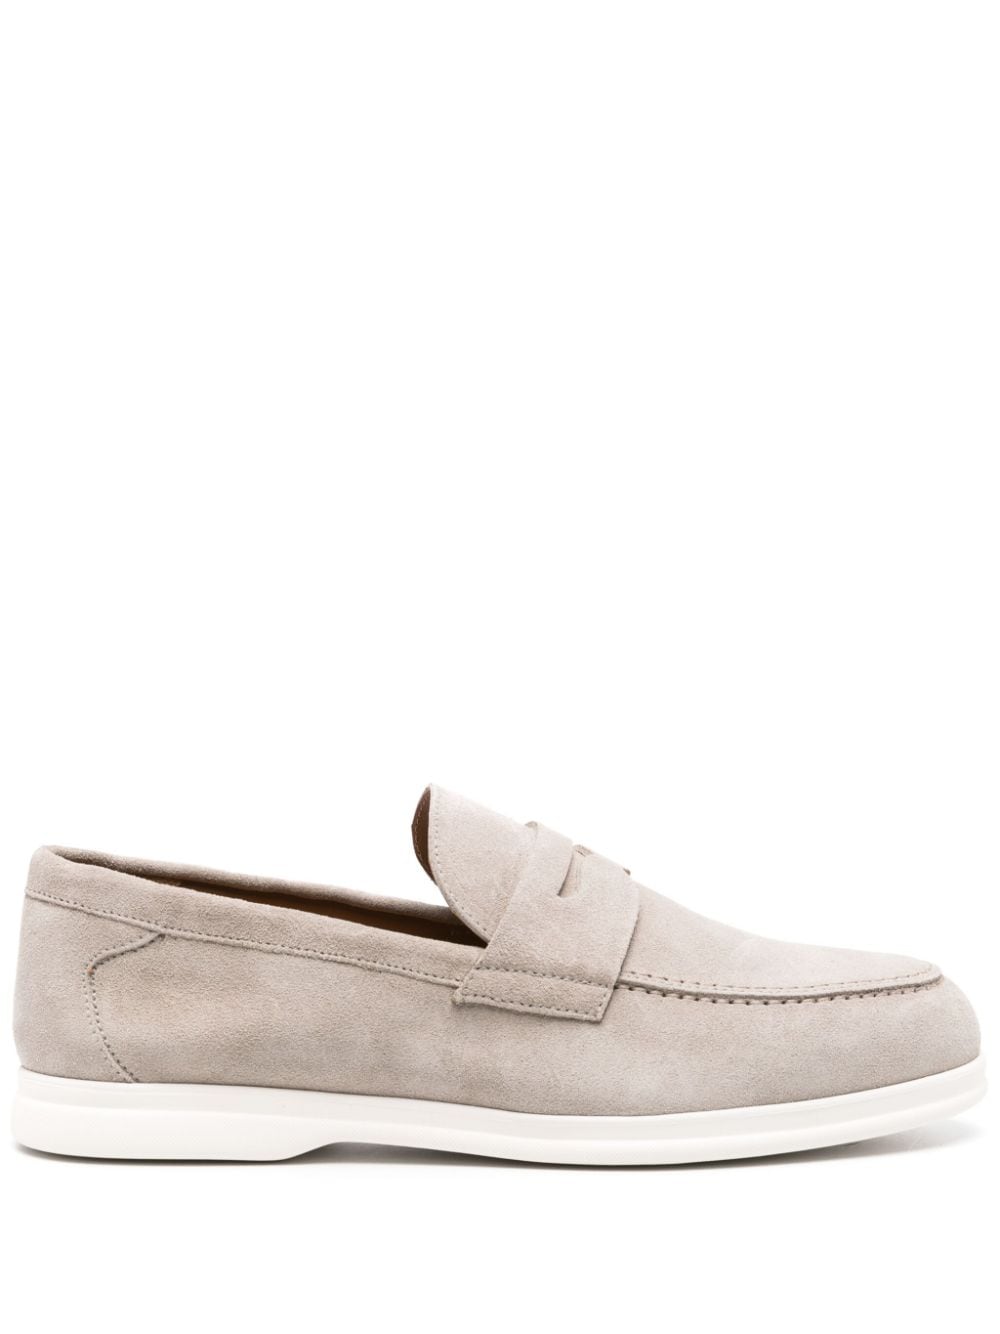 Doucal's suede penny loafers Grey